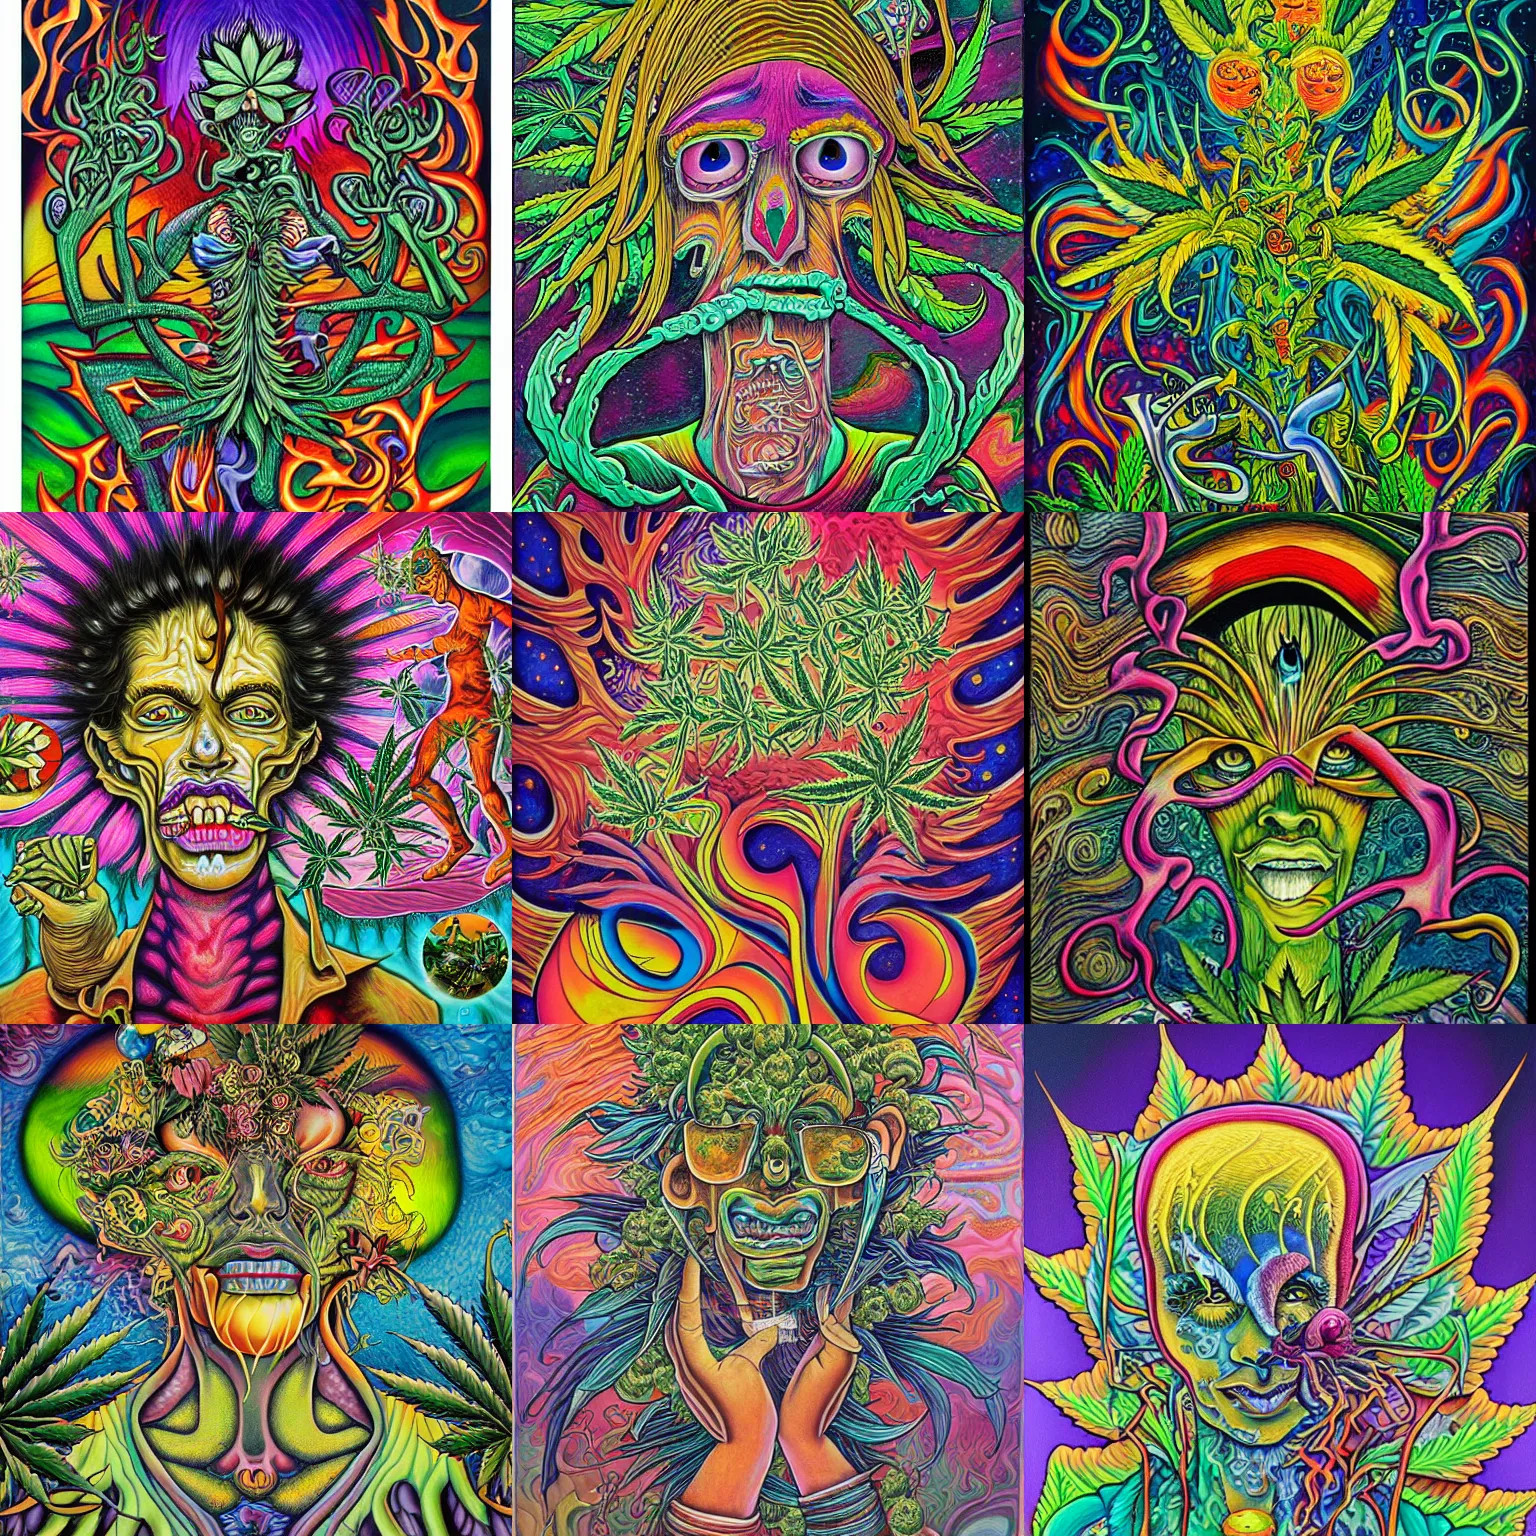 Prompt: Cannabis painting by aaron brooks, chris dyer, android jones, and alex grey